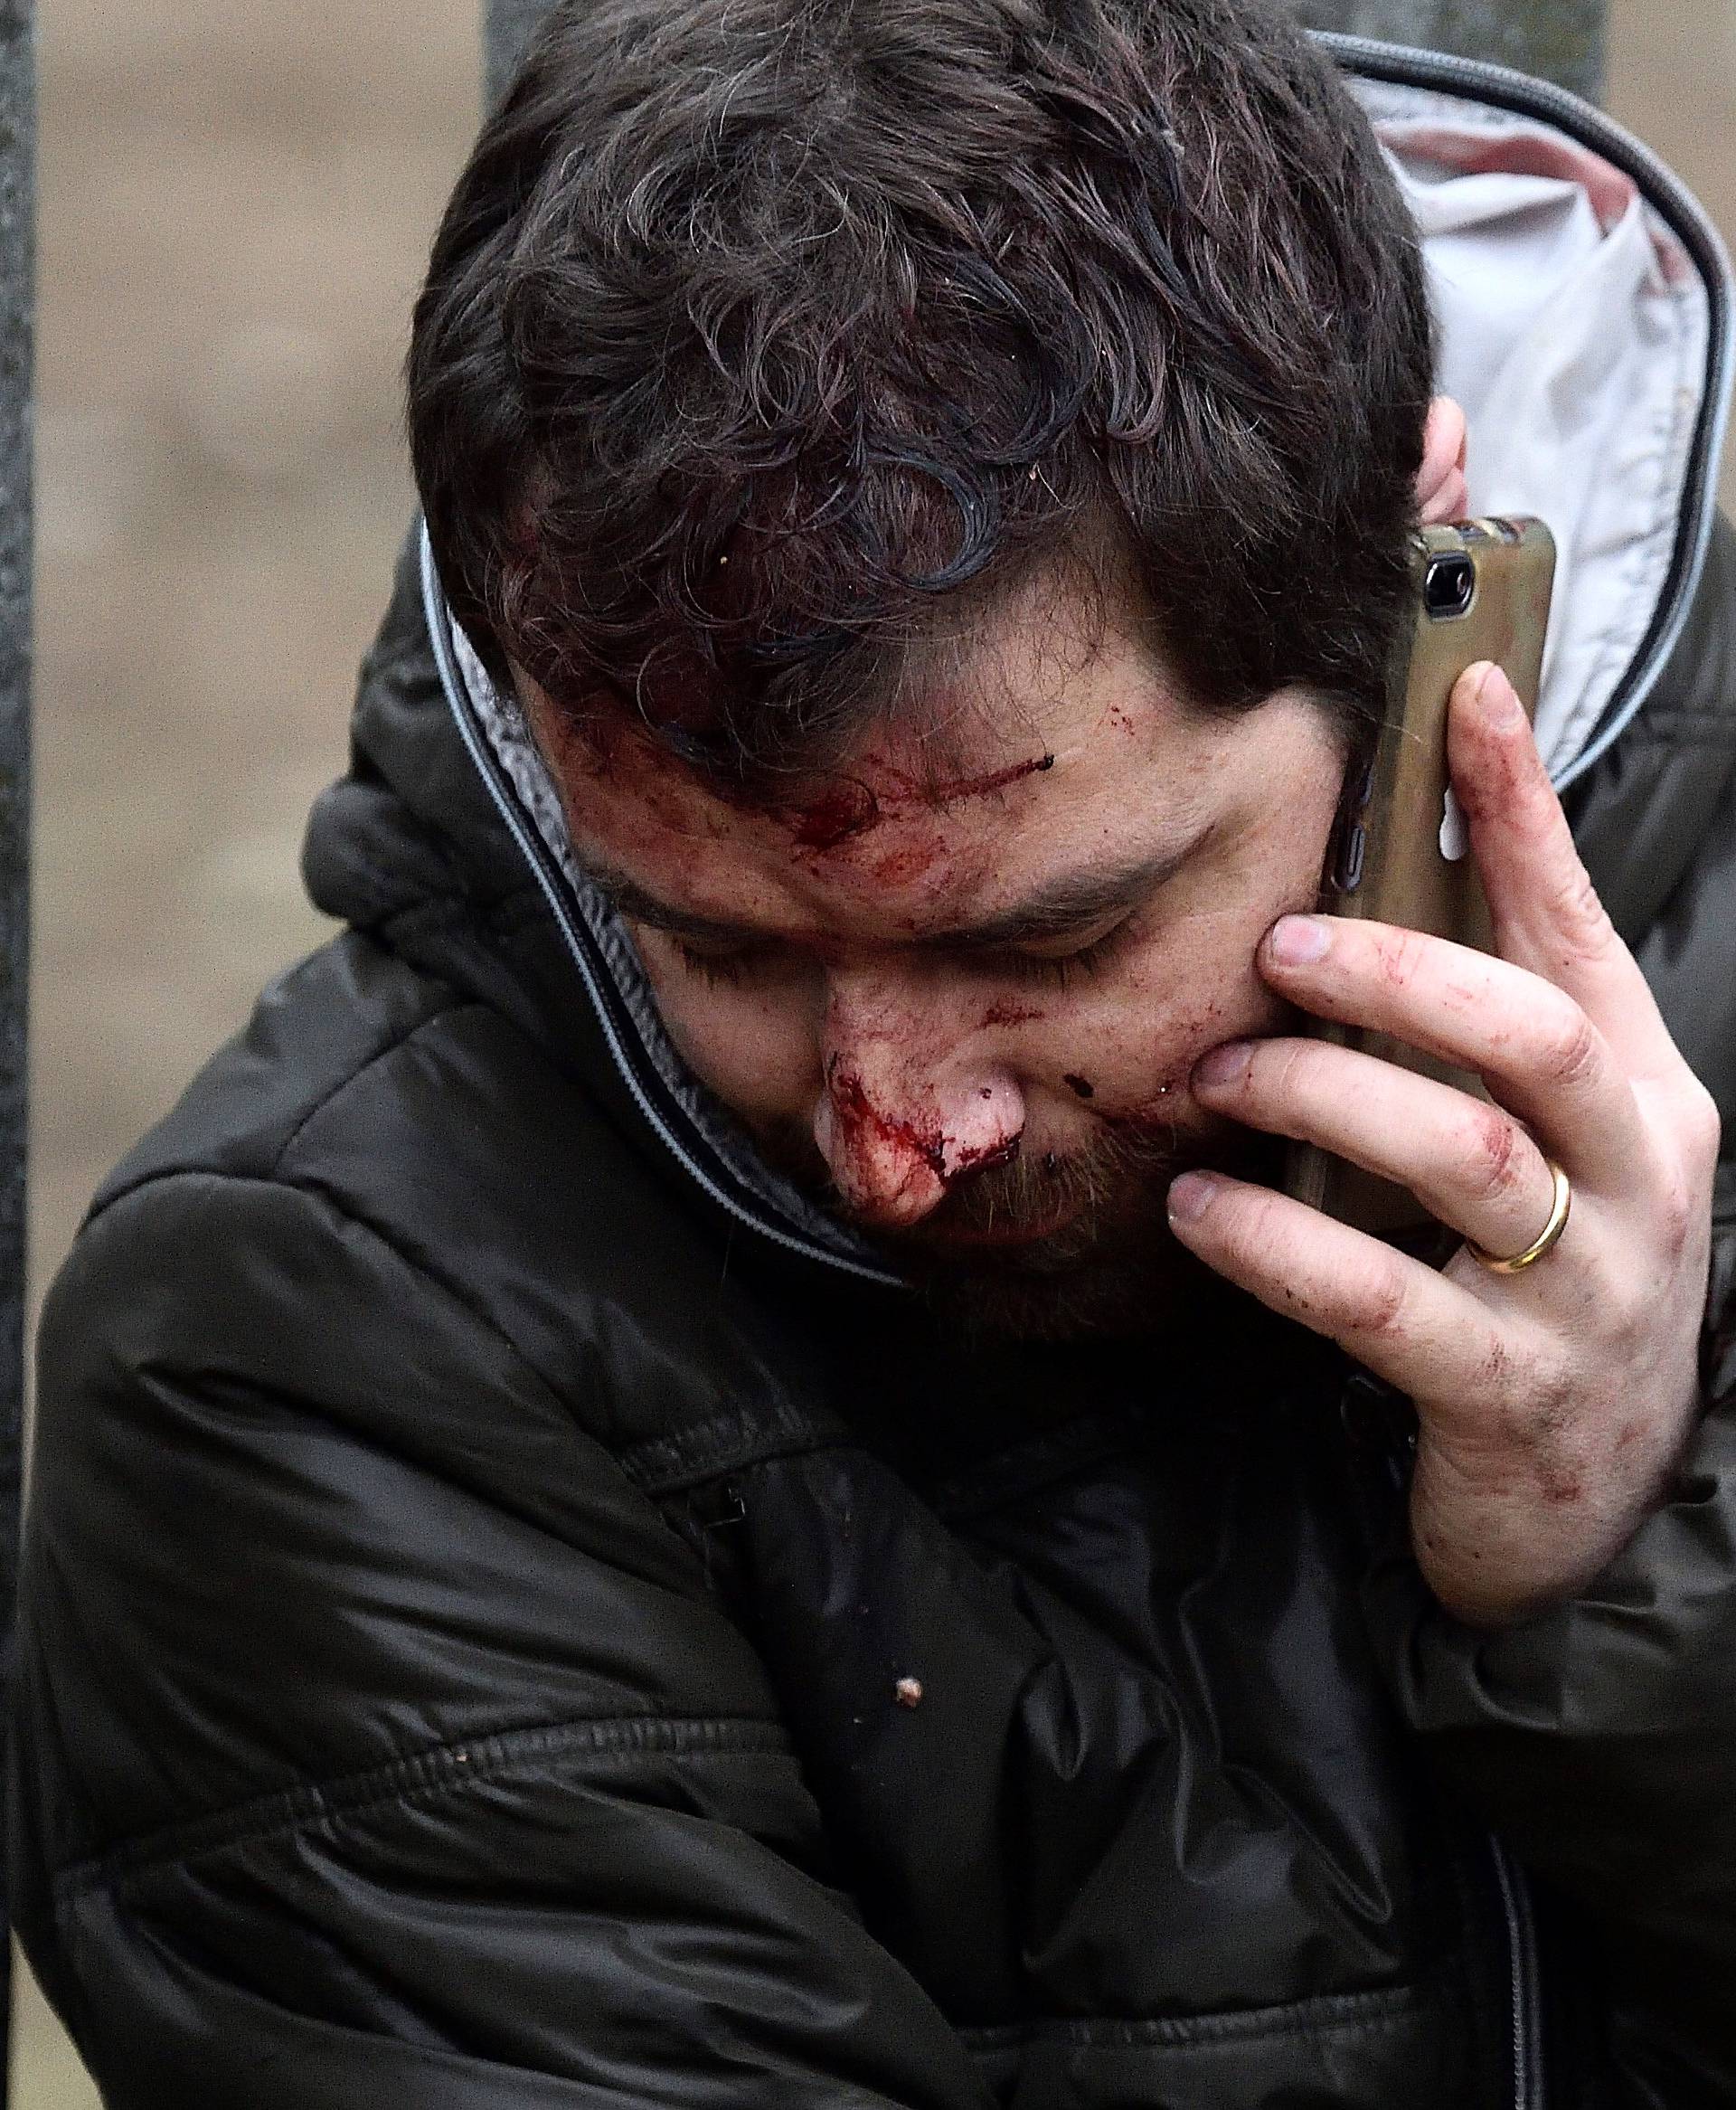 An injured person makes a phone call after two trains derailed in Pioltello, on the outskirts of Milan